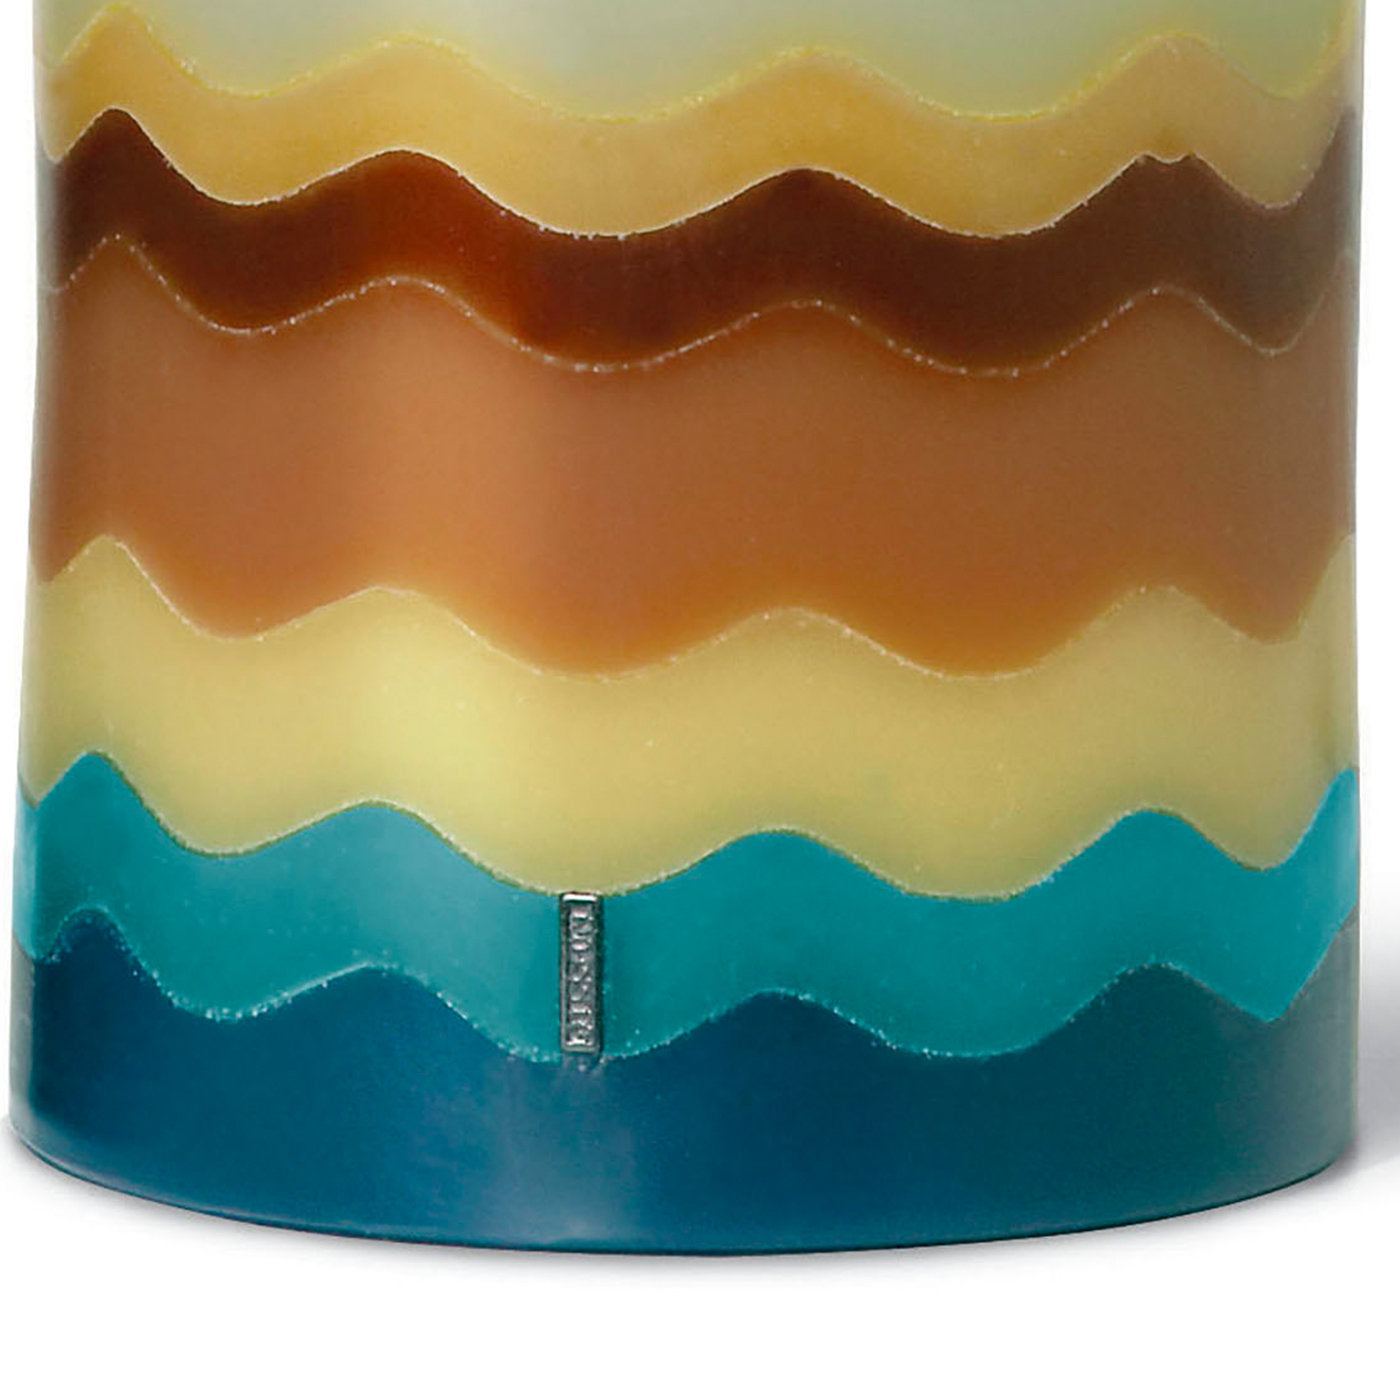 Flame Torta Candle #1 - Alternative view 1